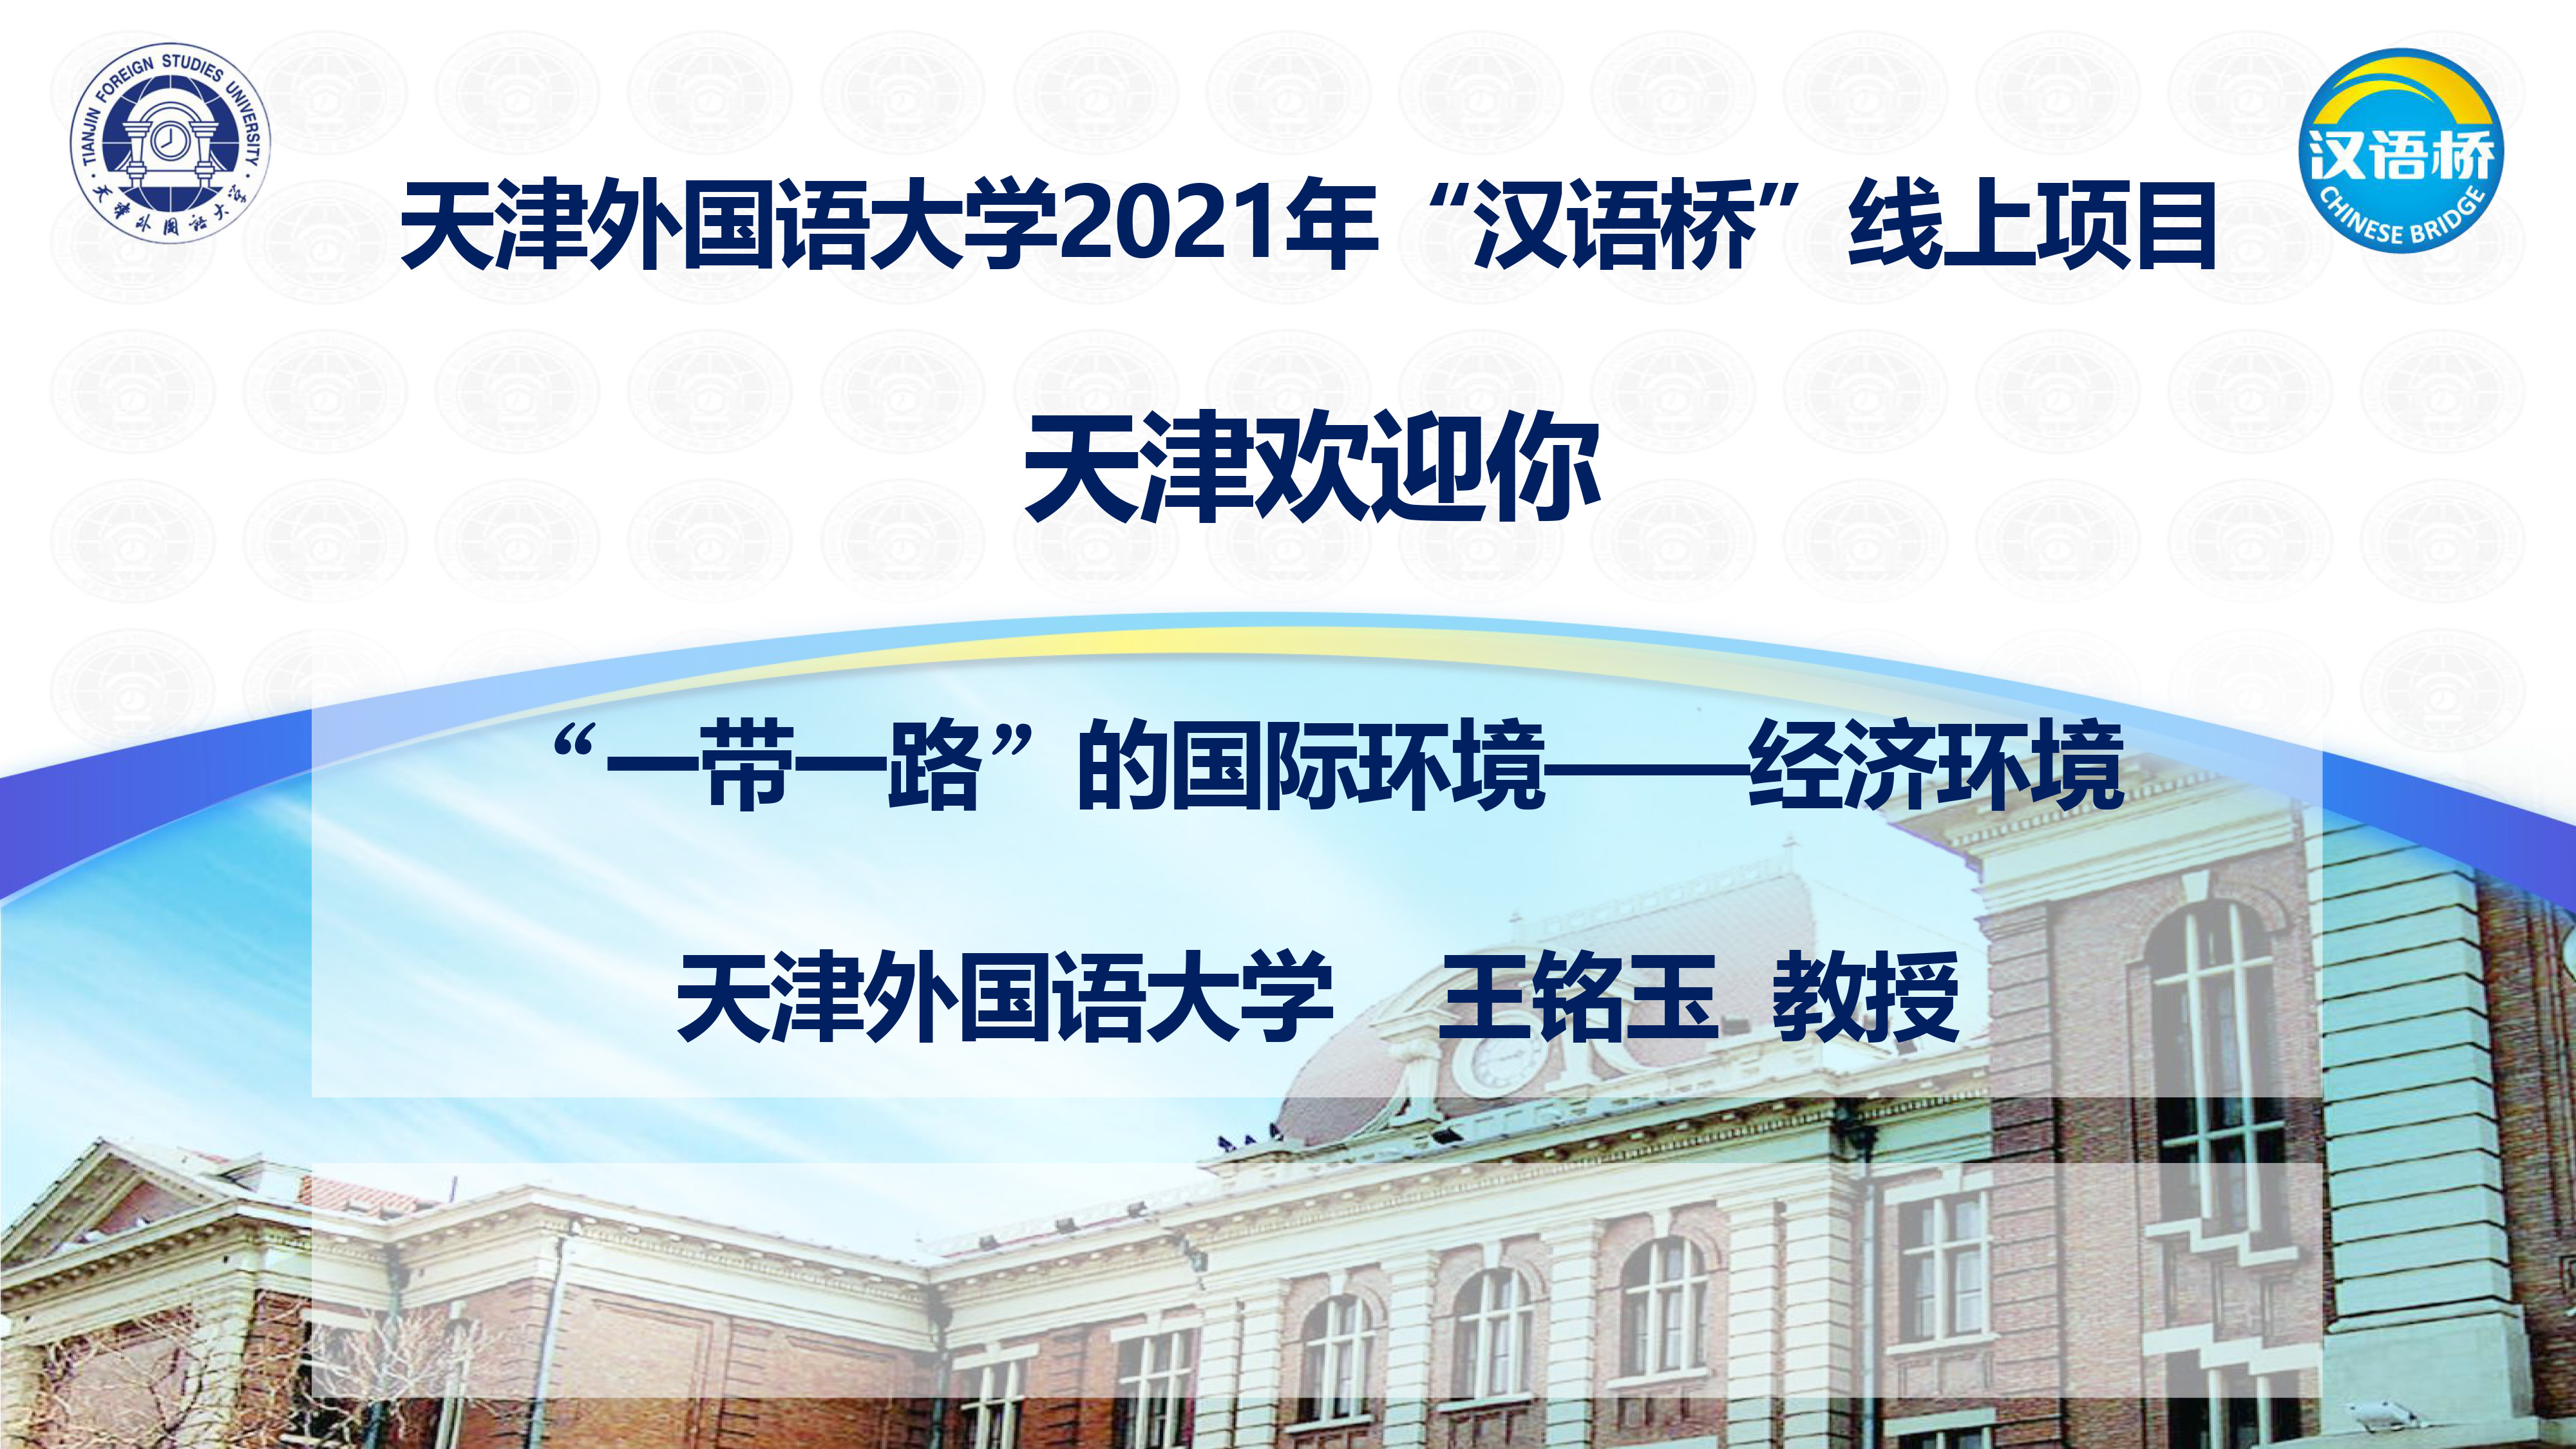 The international environment of The Initiative “Belt and Road”---- Economic environment